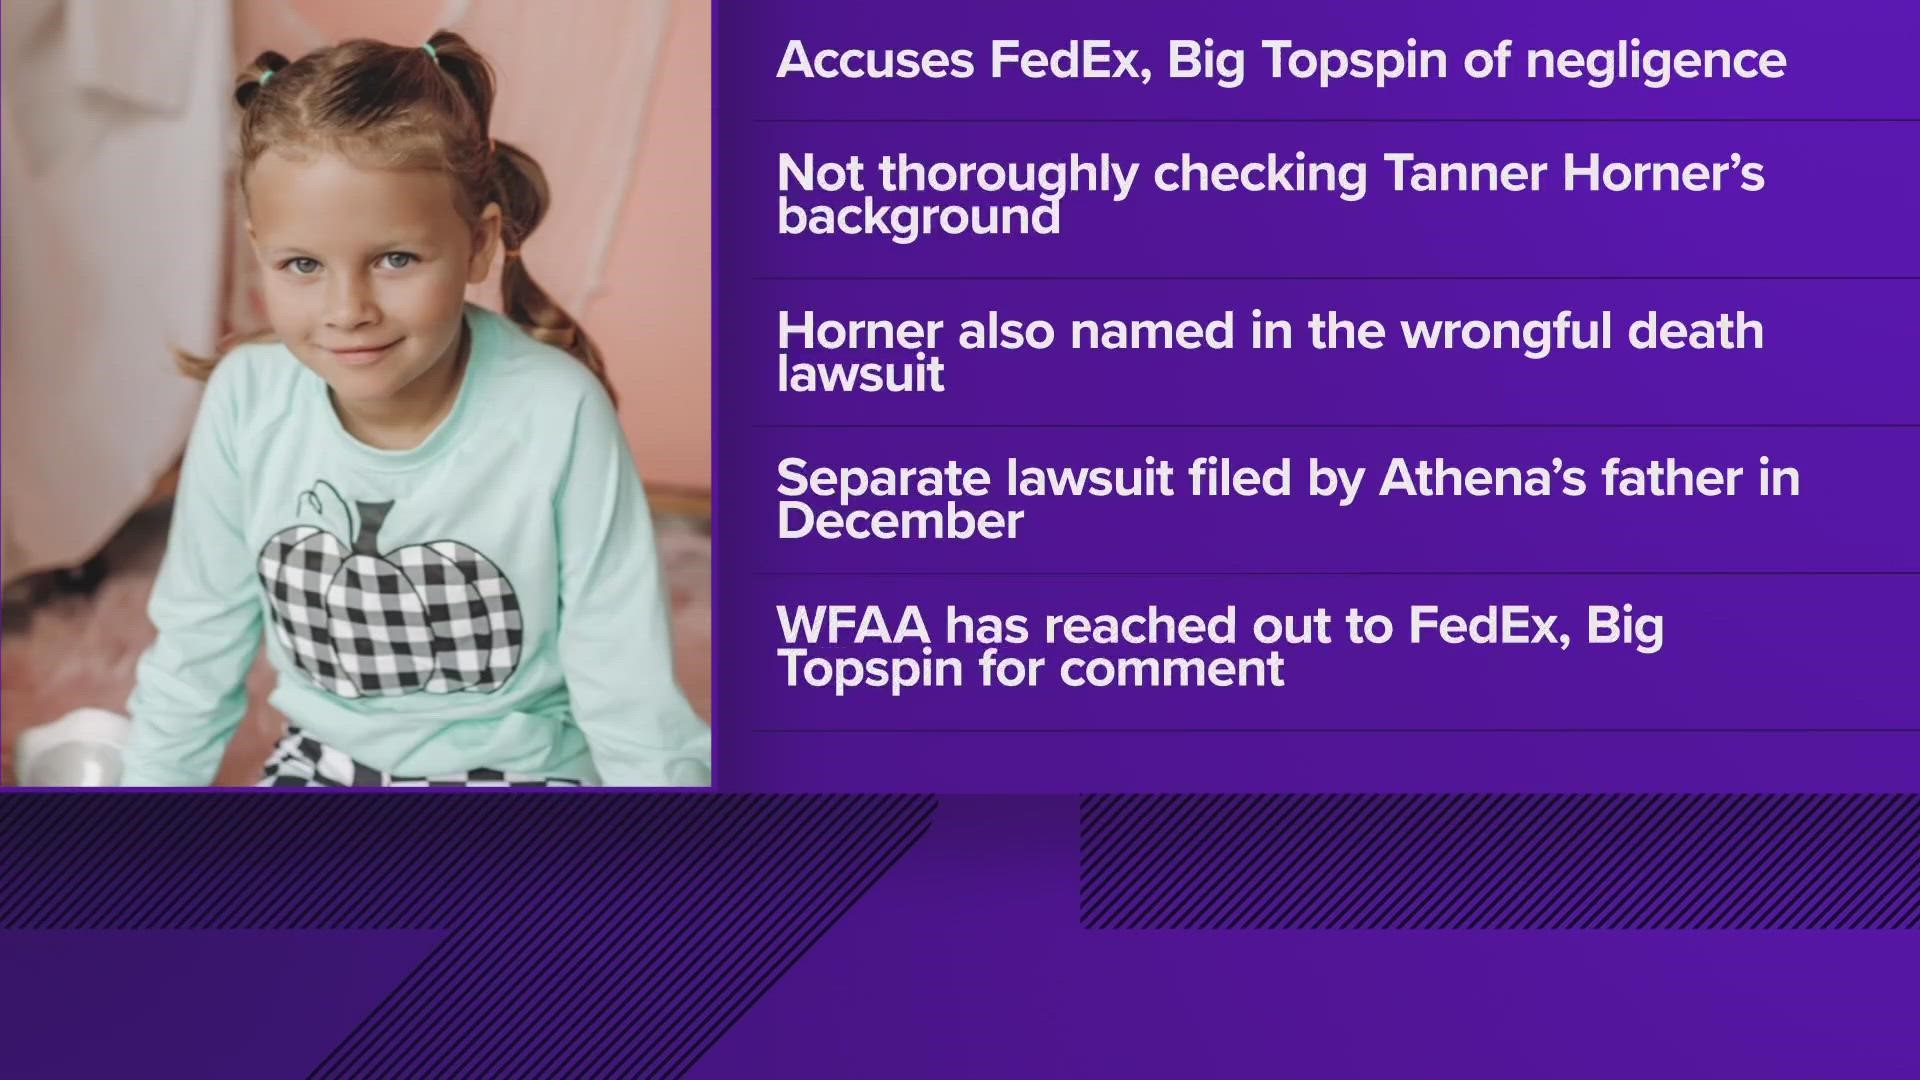 According to an arrest affidavit, a FedEx truck driver told police he abducted and killed the 7-year-old after accidentally hitting her while backing up.